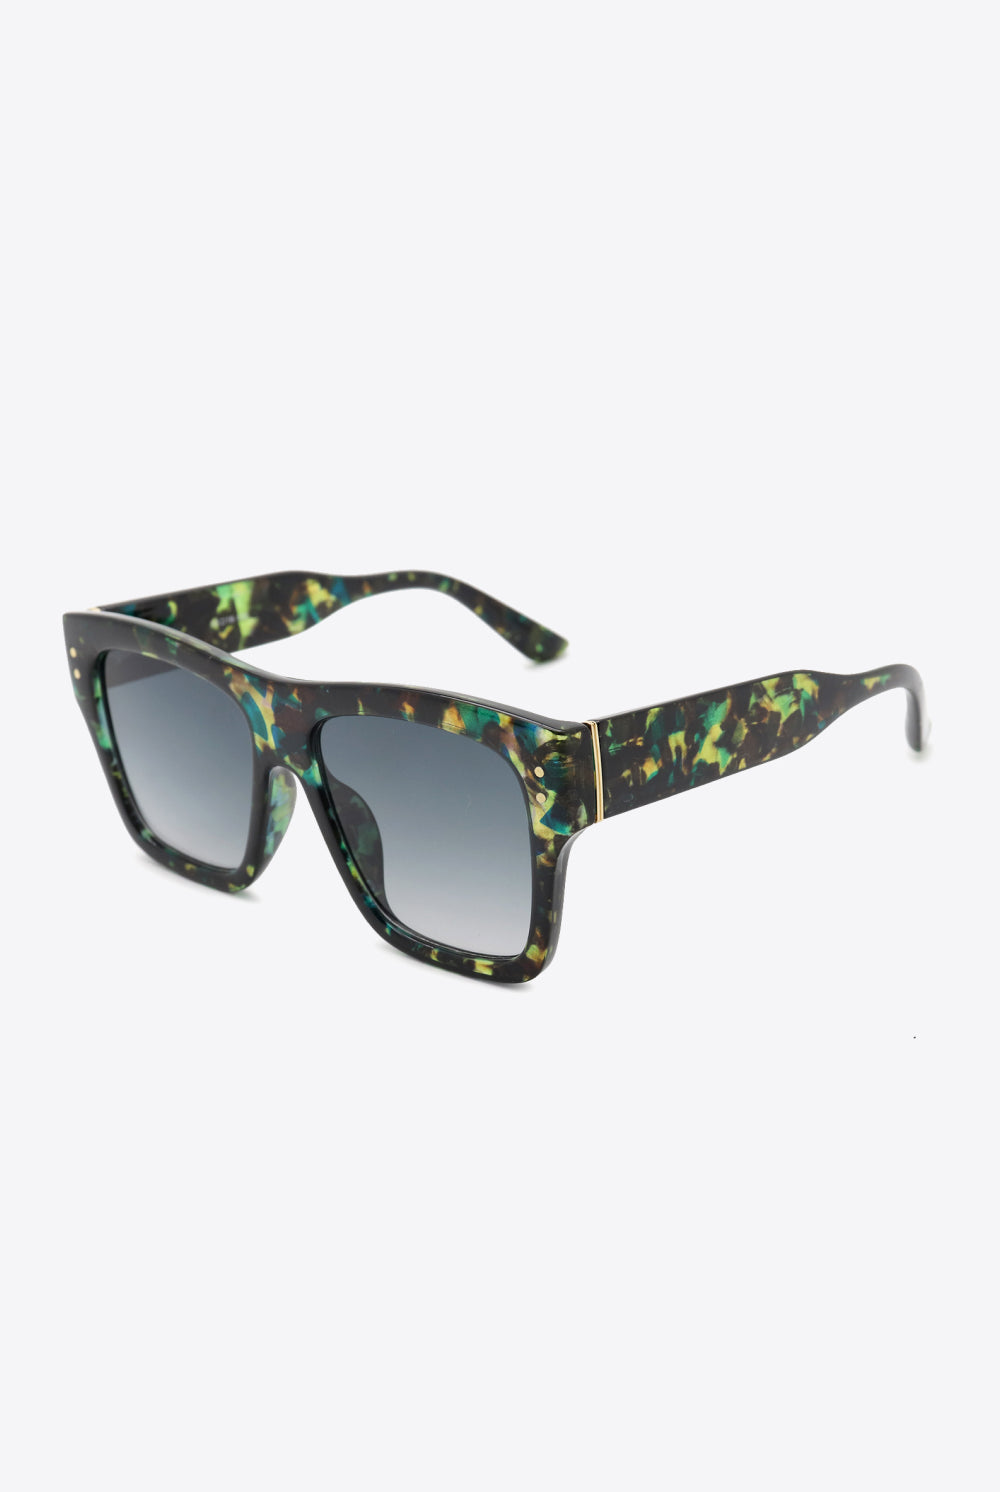 White Smoke Another Day Like This UV400 Patterned Polycarbonate Square Sunglasses Sunglasses